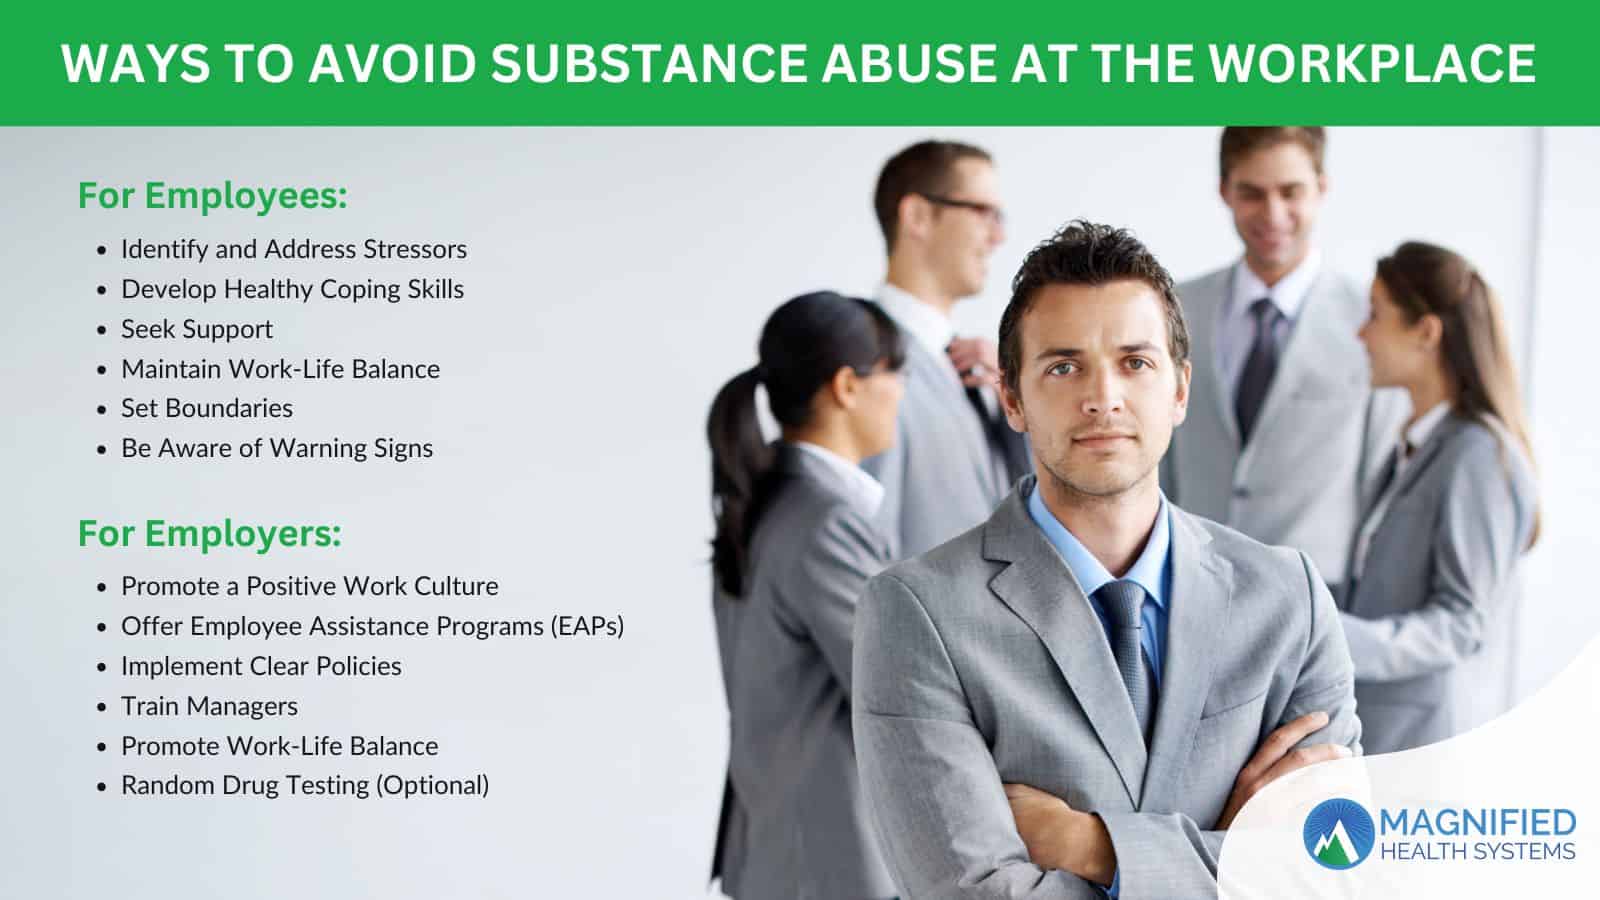 ways to avoid substance at the workplace